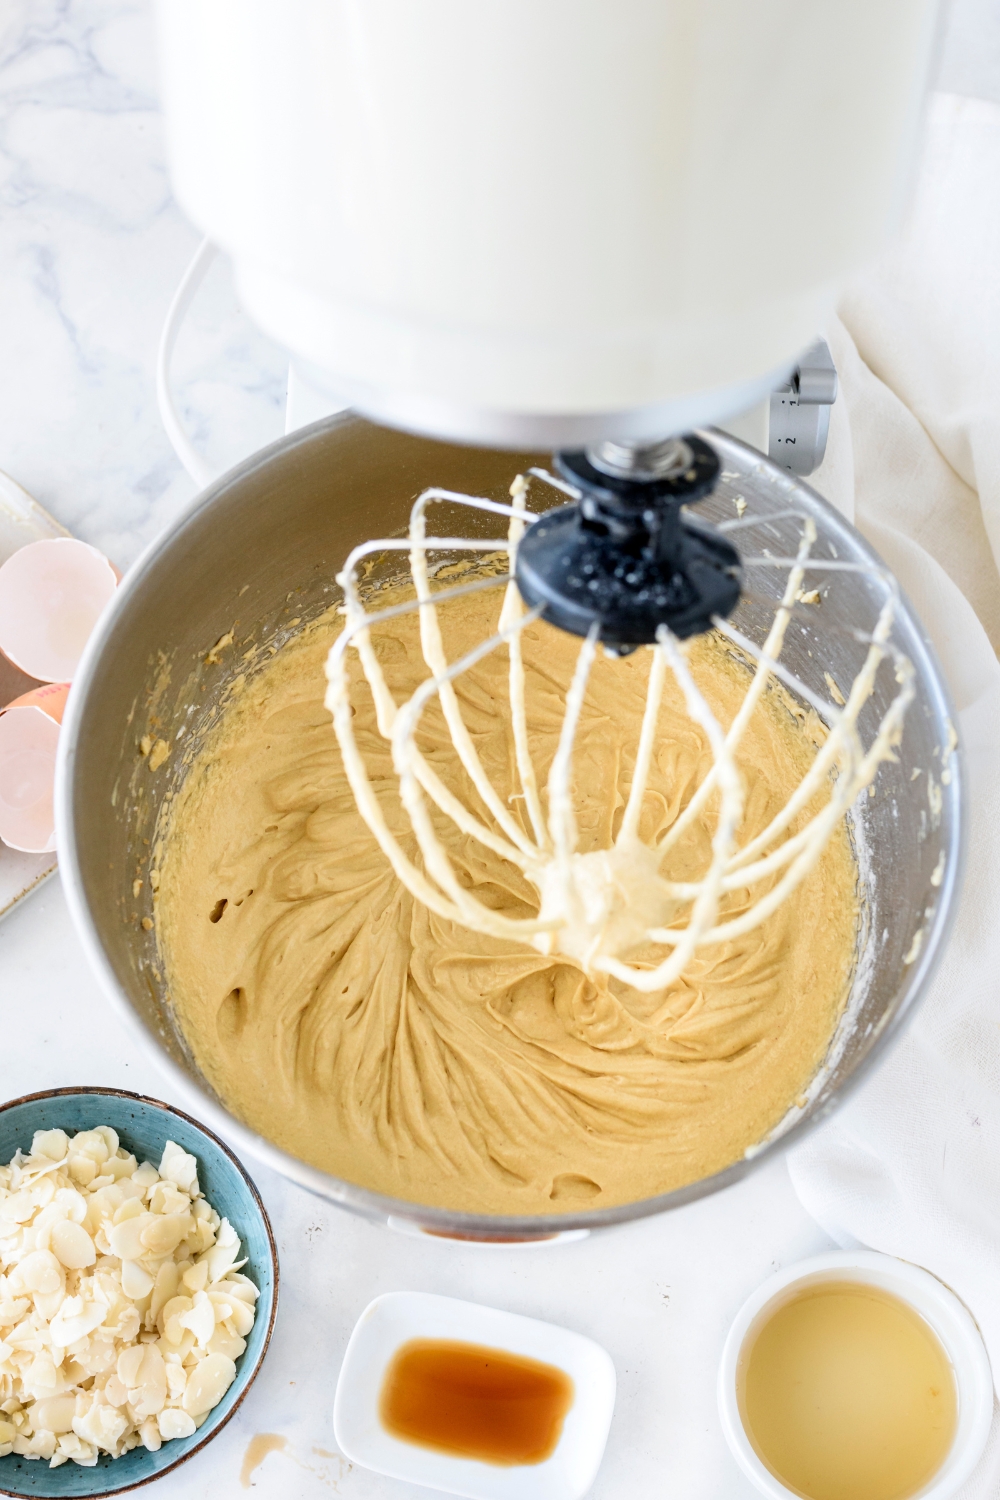 Honey cake batter being mixed in a stand mixer.